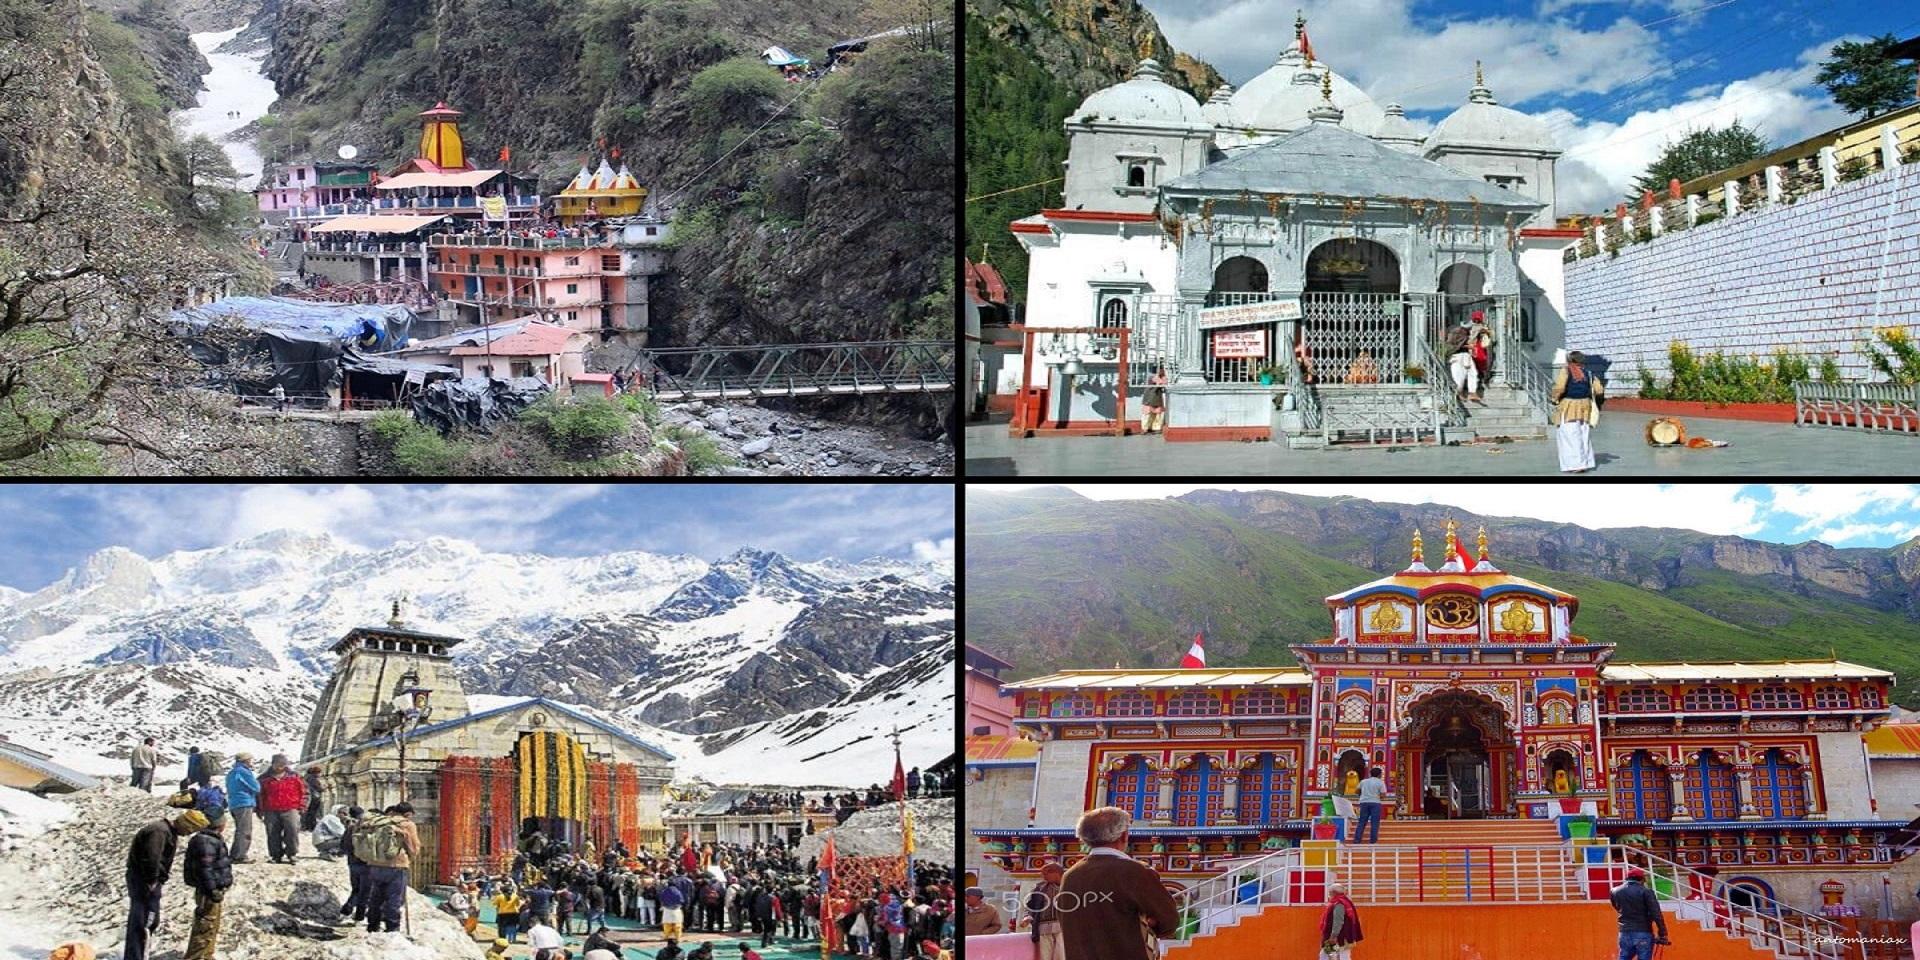 Affordable taxi rental service for Chardham Yatra